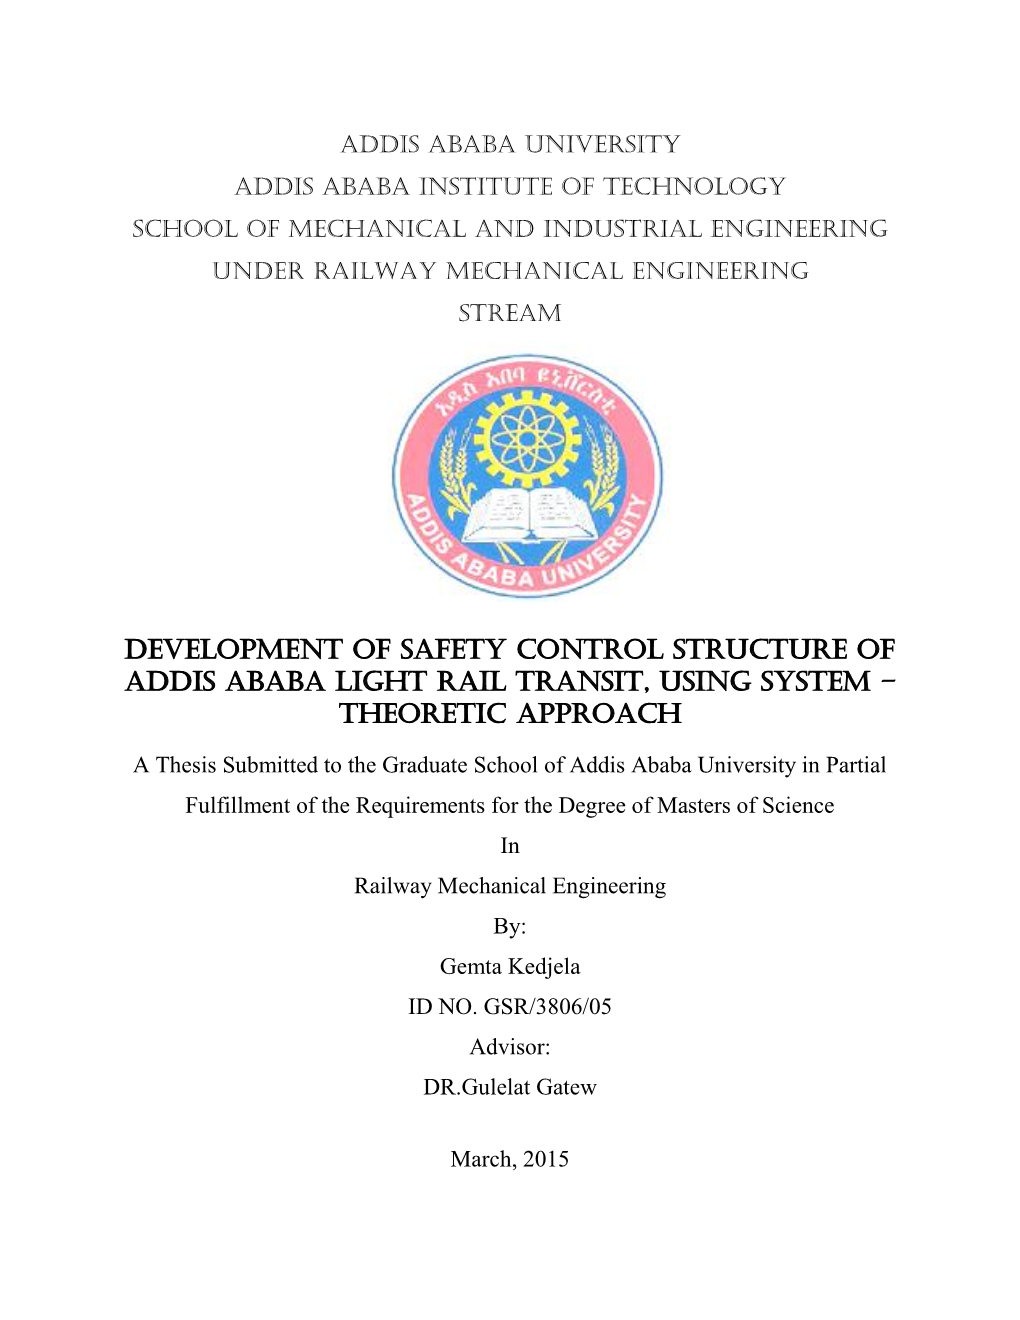 Development of Safety Control Structure of Addis Ababa Light Rail Transit, Using System – Theoretic Approach